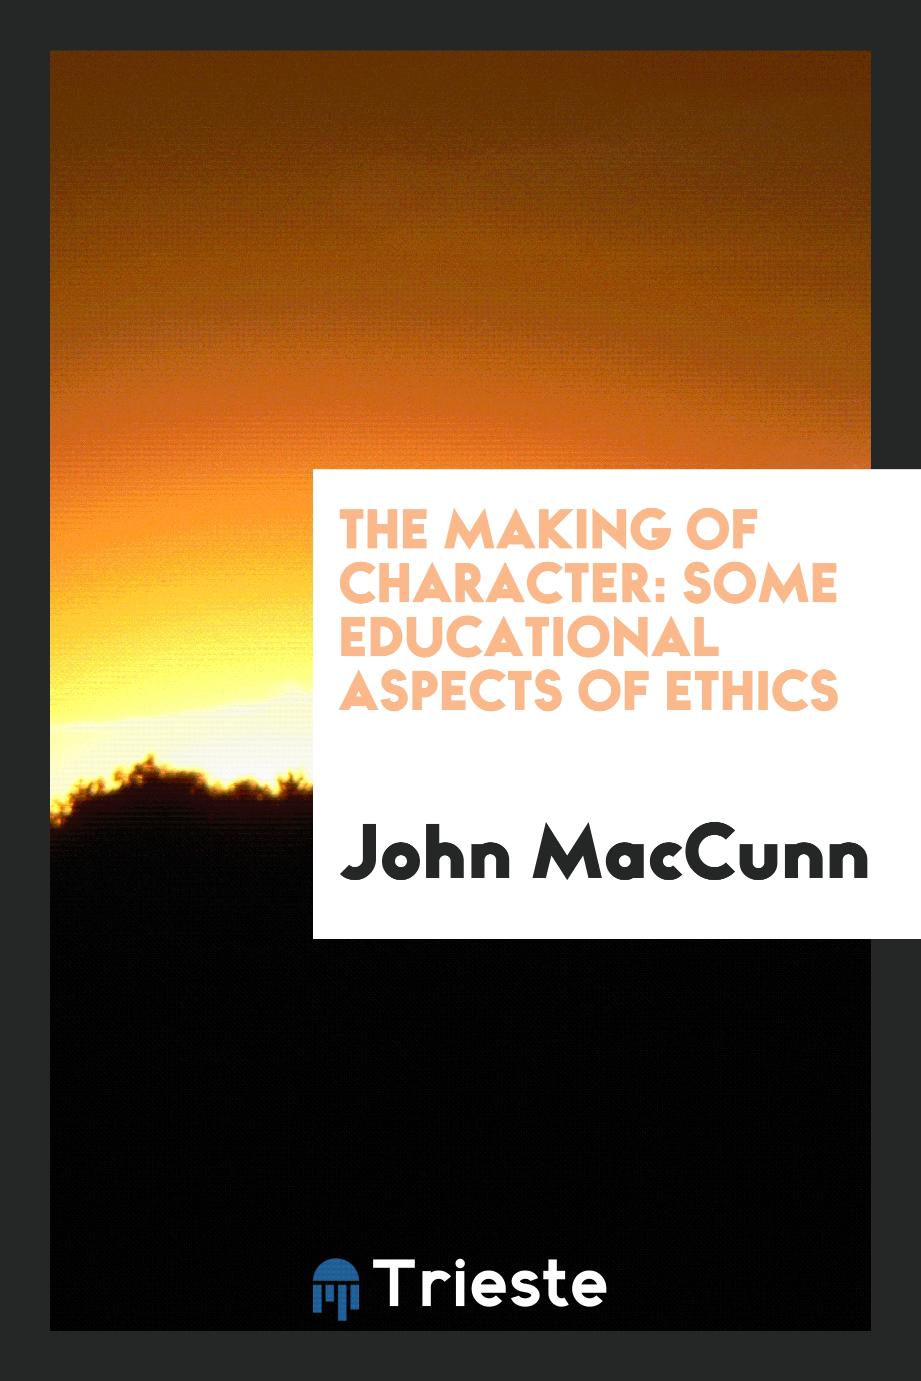 The making of character: some educational aspects of ethics